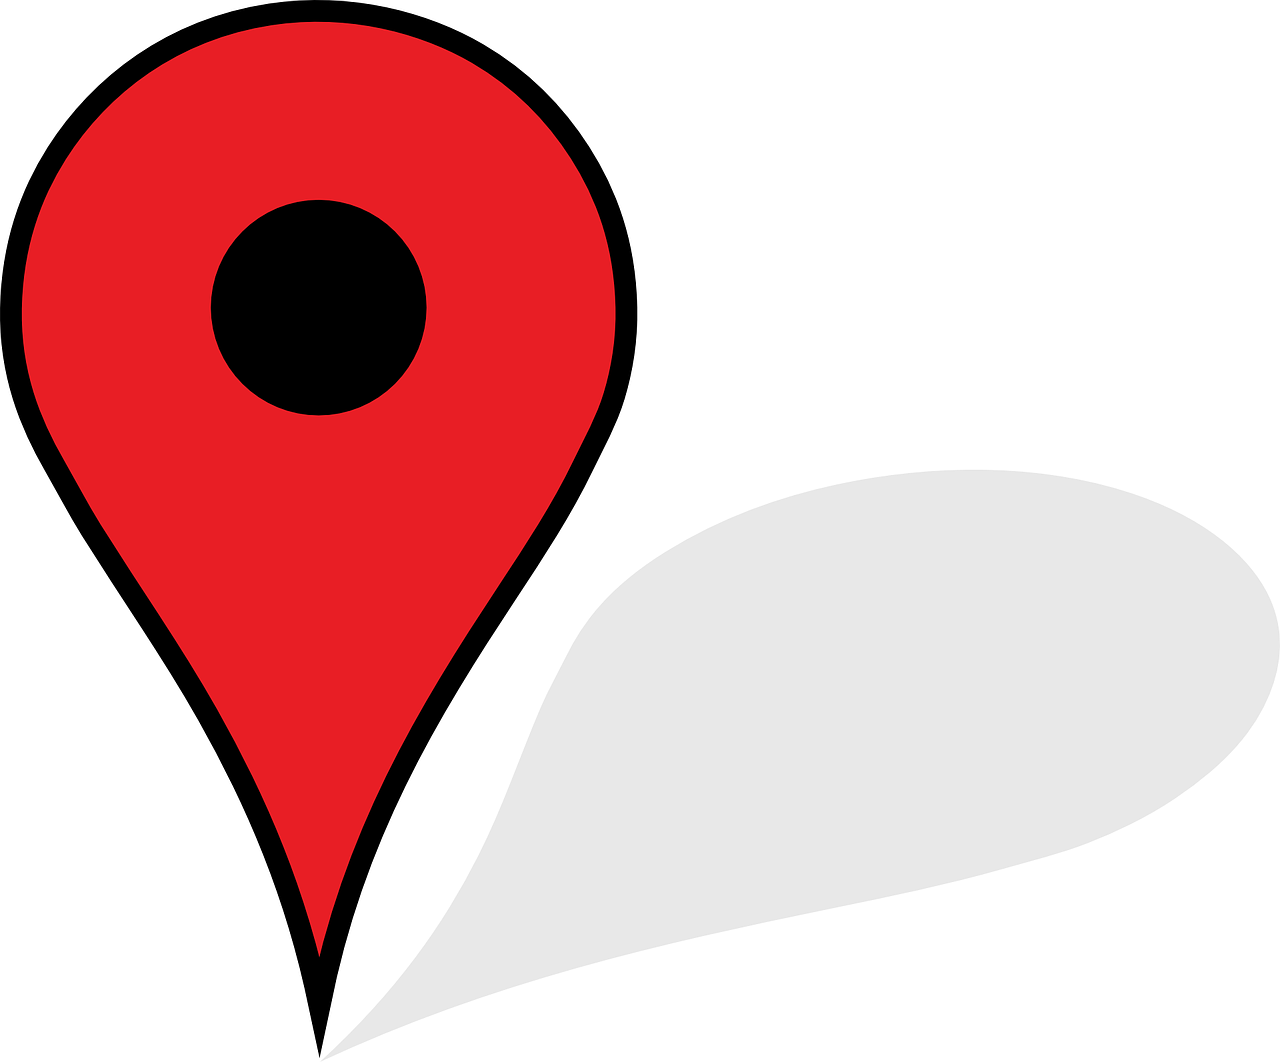 a red pin on a black background, regionalism, google street view, pictogram, istockphoto, banner